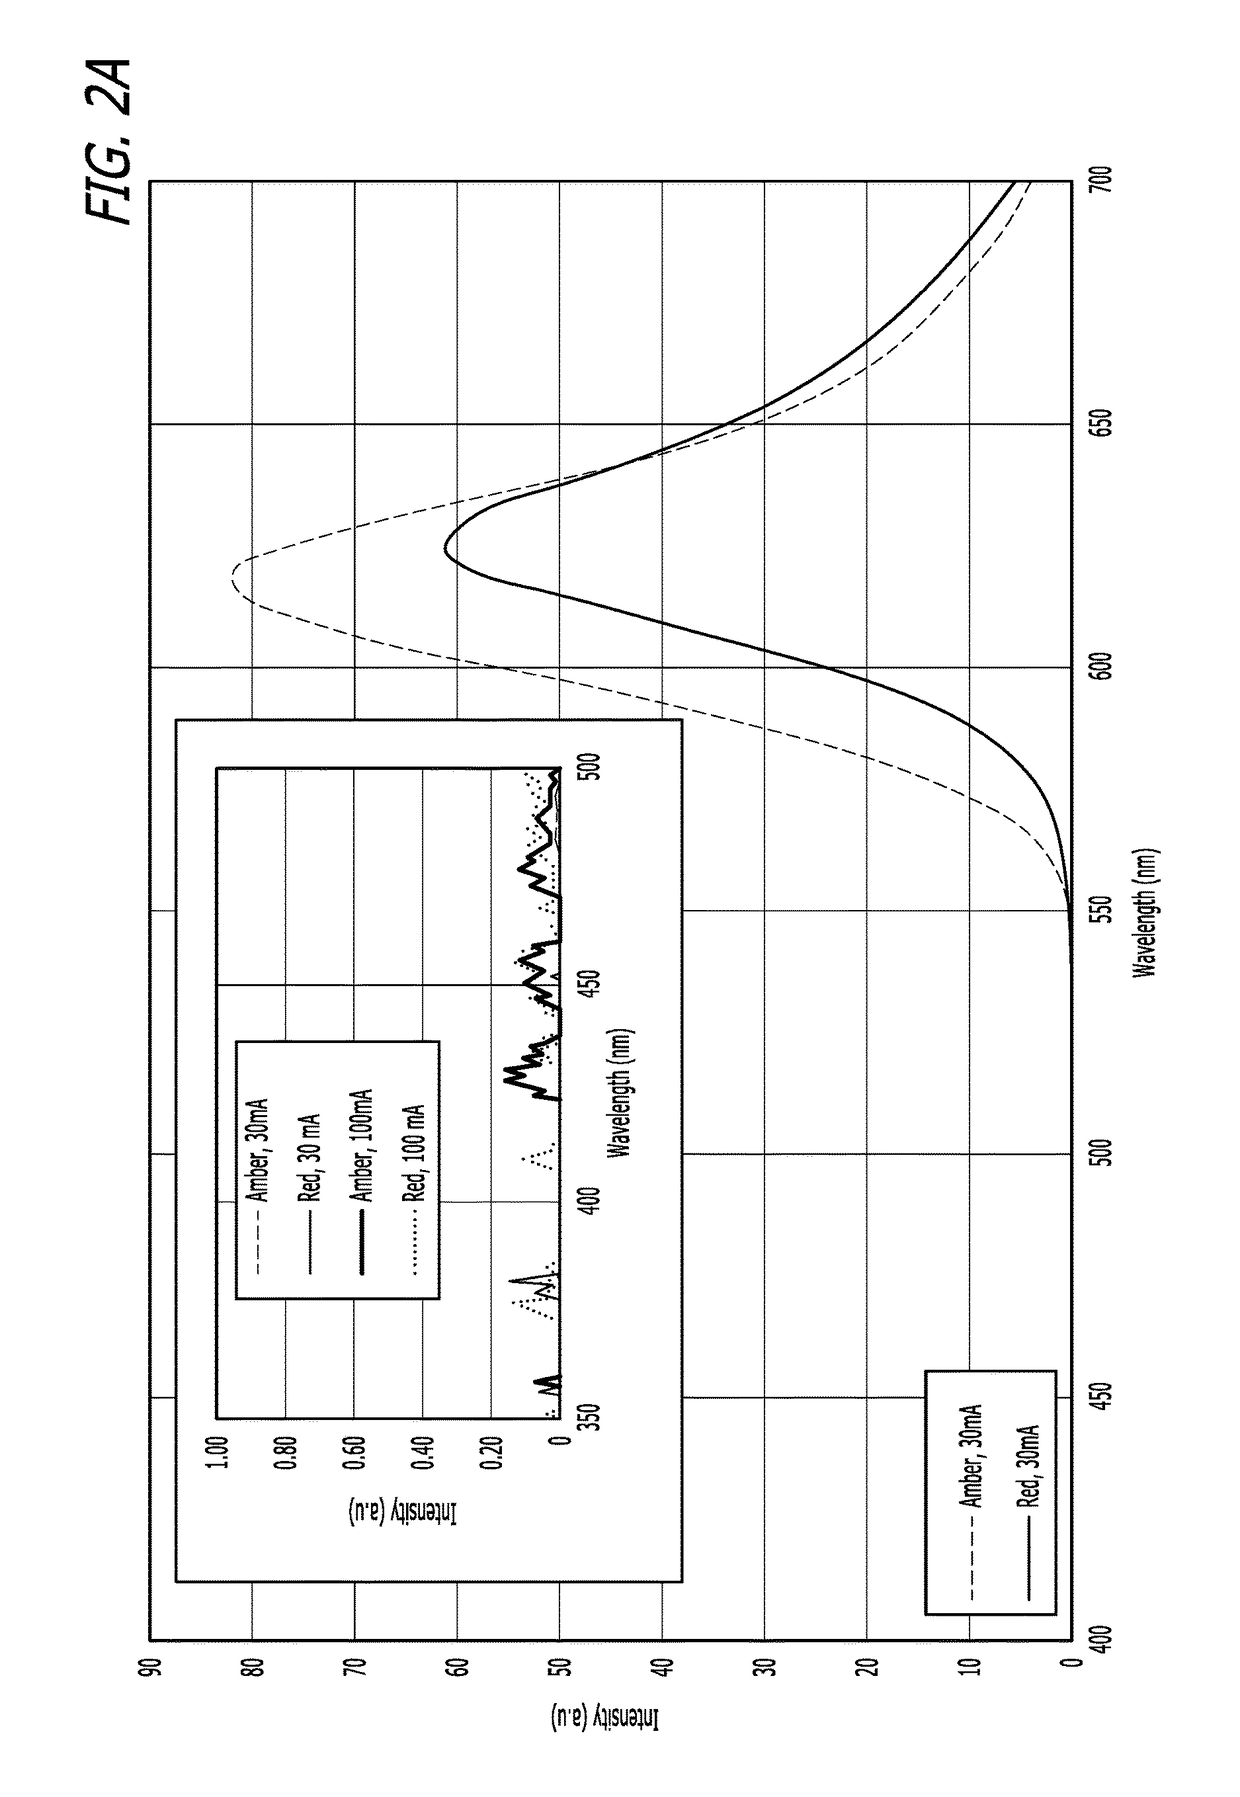 III-Nitride Semiconductor Light Emitting Device Having Amber-to-Red Light Emission (&gt;600 nm) and a Method for Making Same